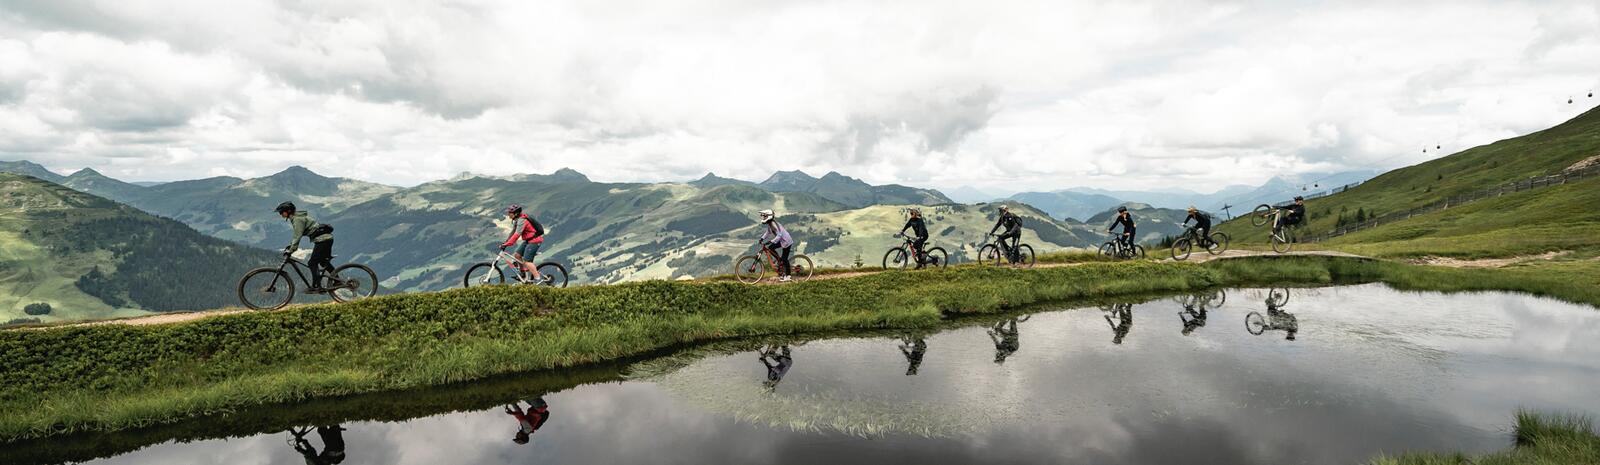 Ride with the Pros at GlemmRide Bike Festival Saalbach | © Klaus Listl